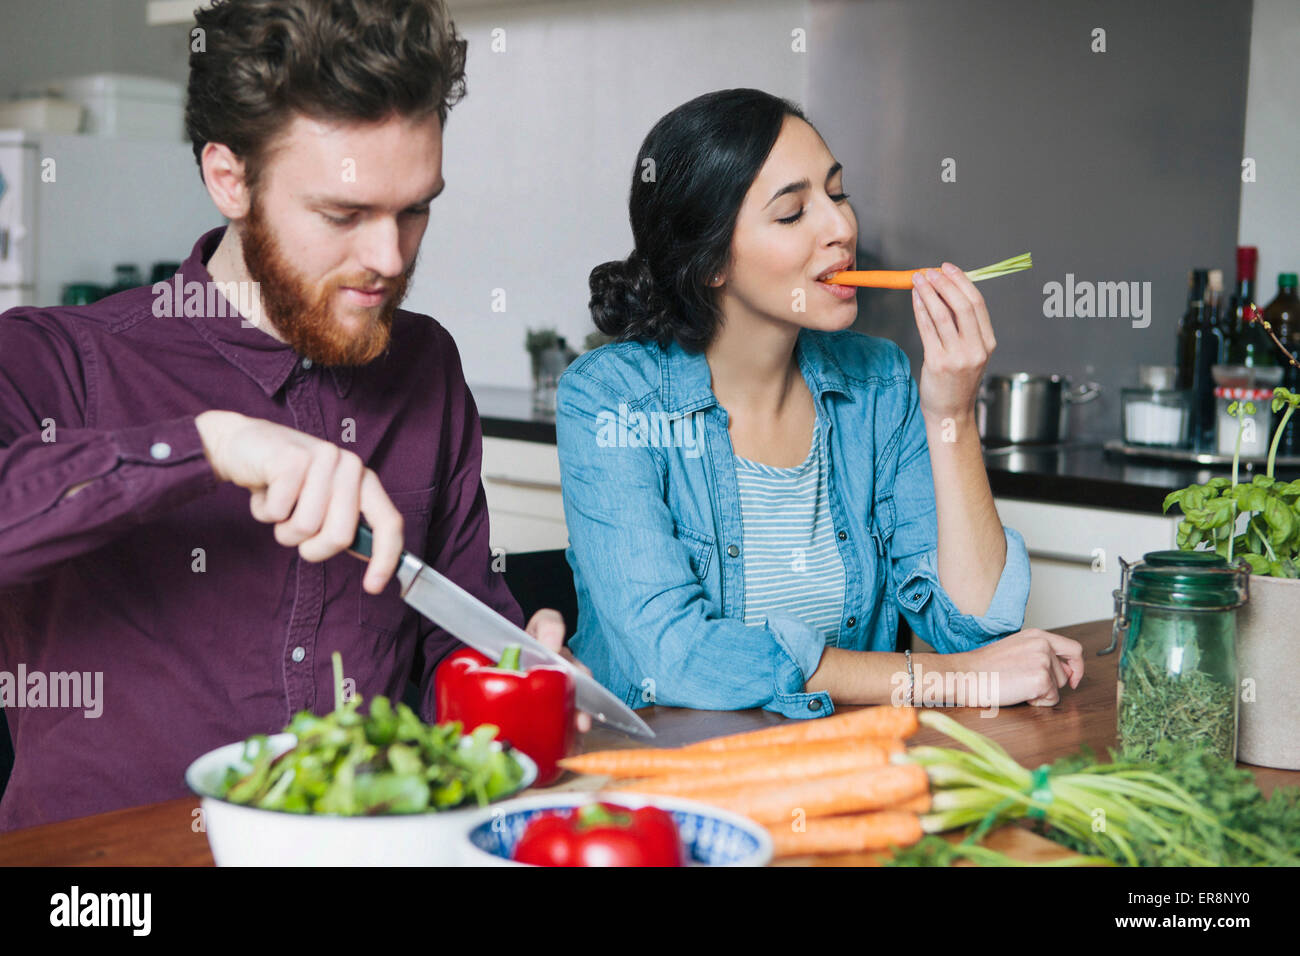 Young man chopping red bell pepper beside woman eating carrot at kitchen table Stock Photo